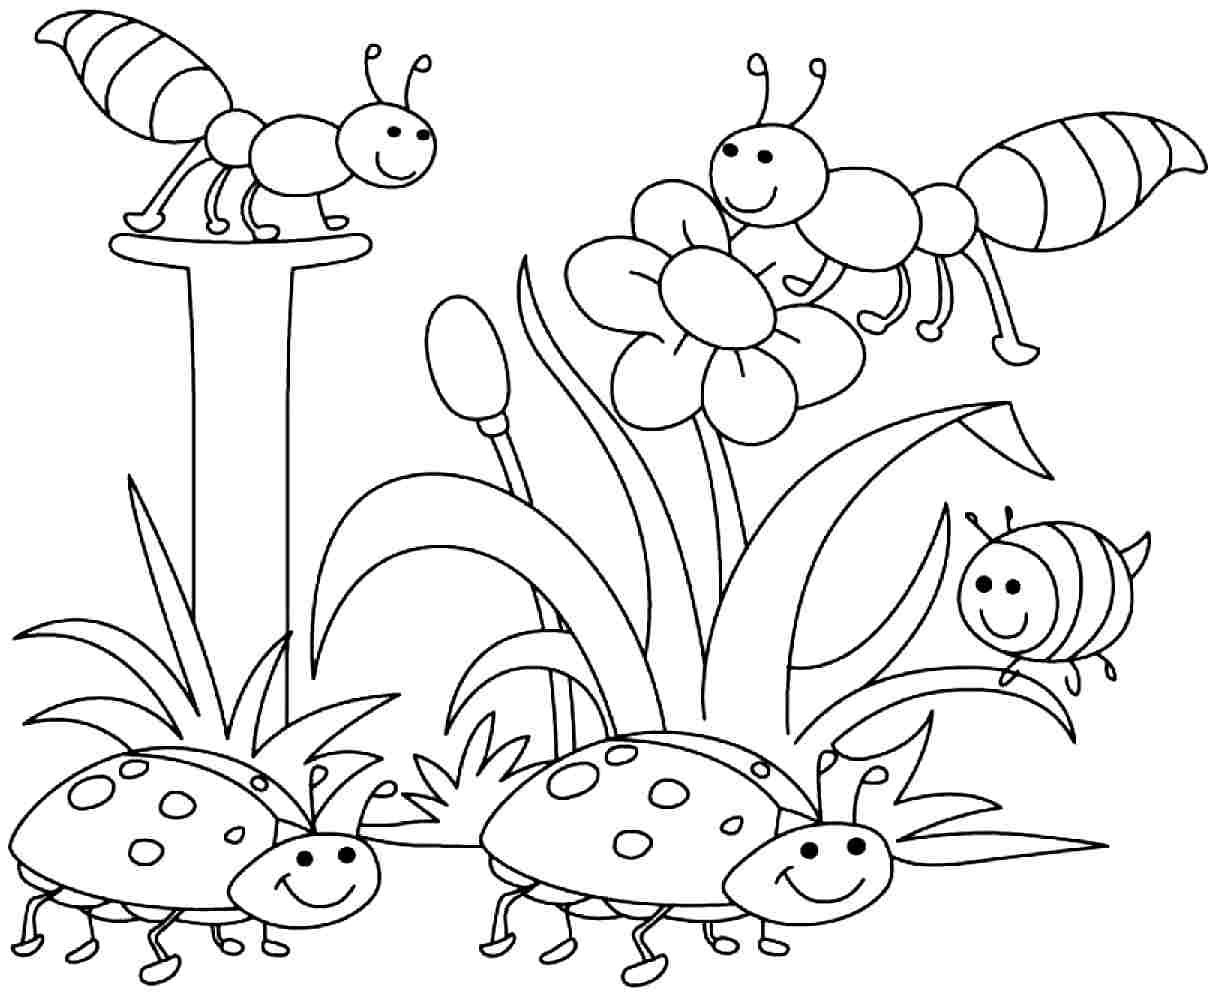 natural-coloring-pages-at-getcolorings-free-printable-colorings-pages-to-print-and-color